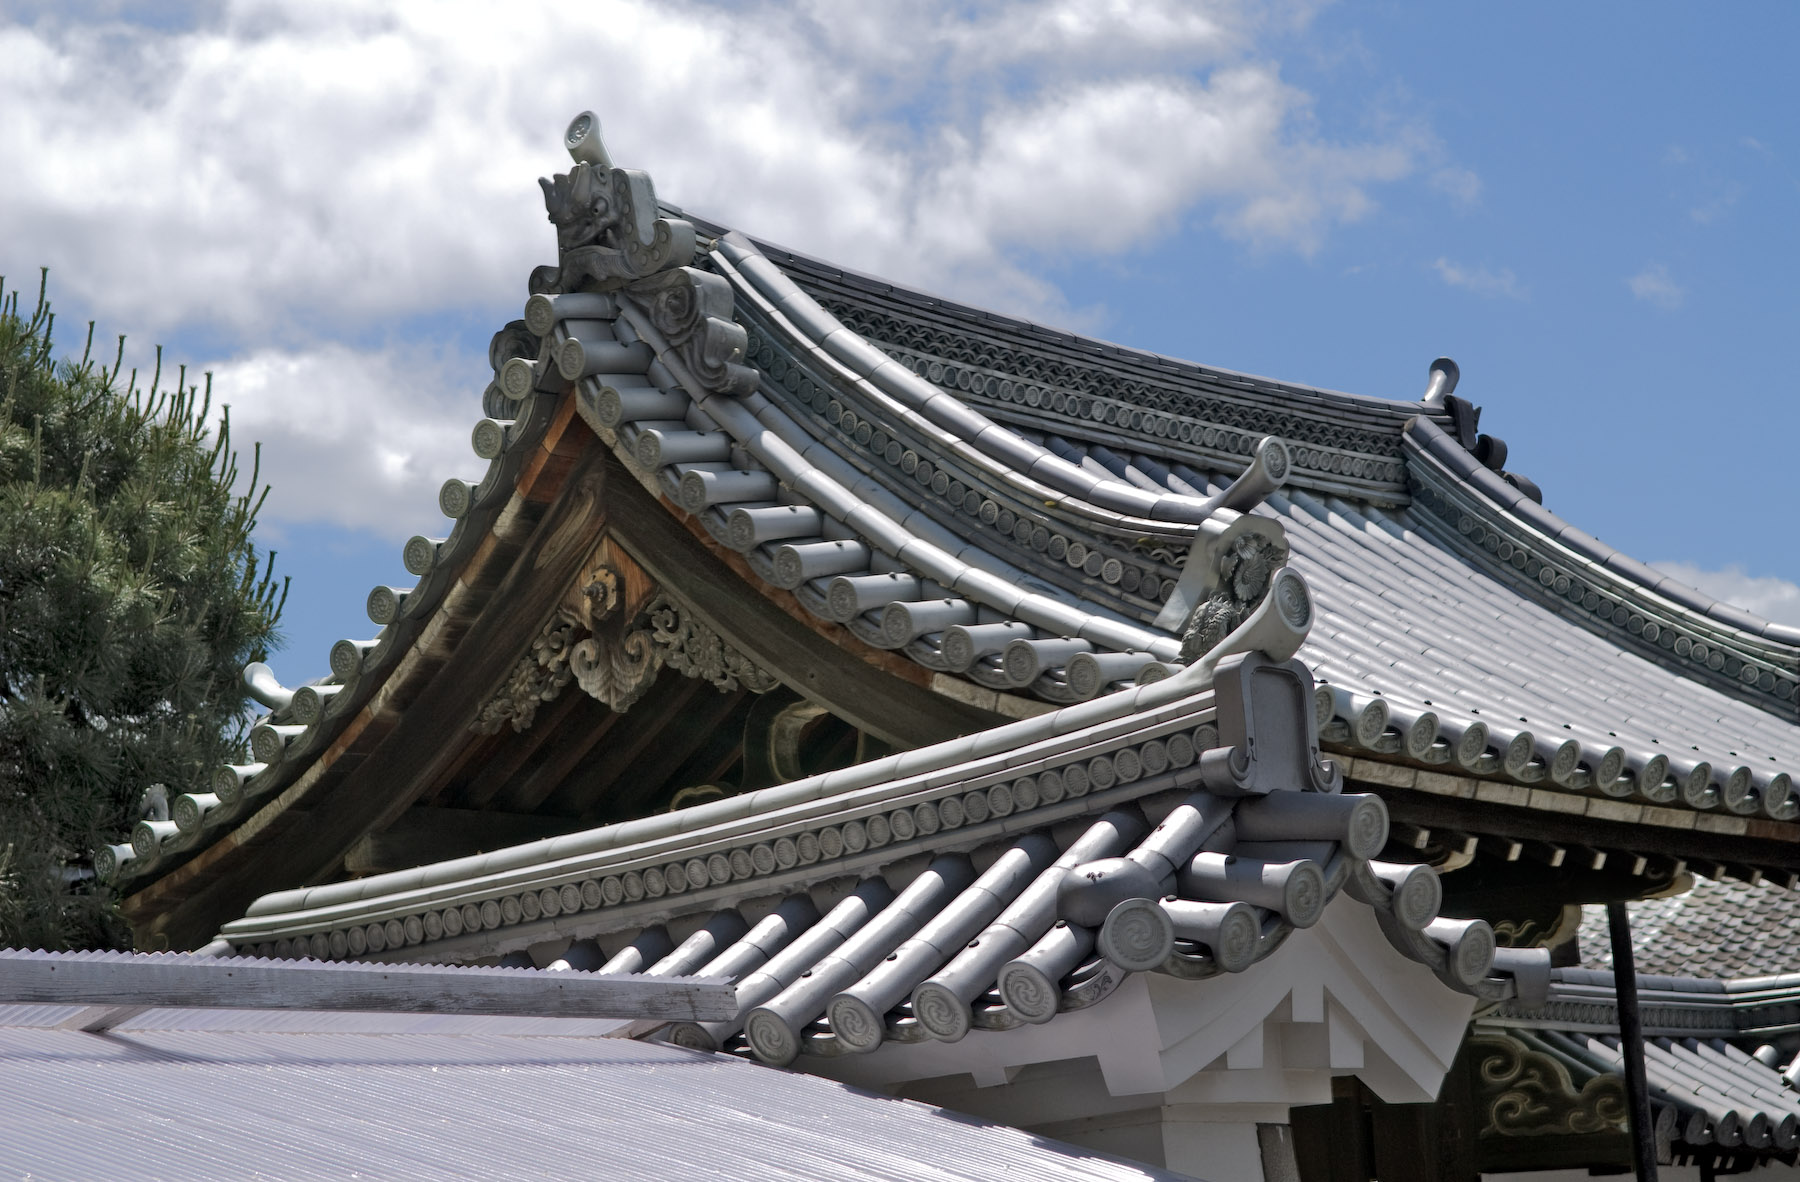 Jeffrey Friedl's Blog » A Randomly Photographed Stroll in Kyoto